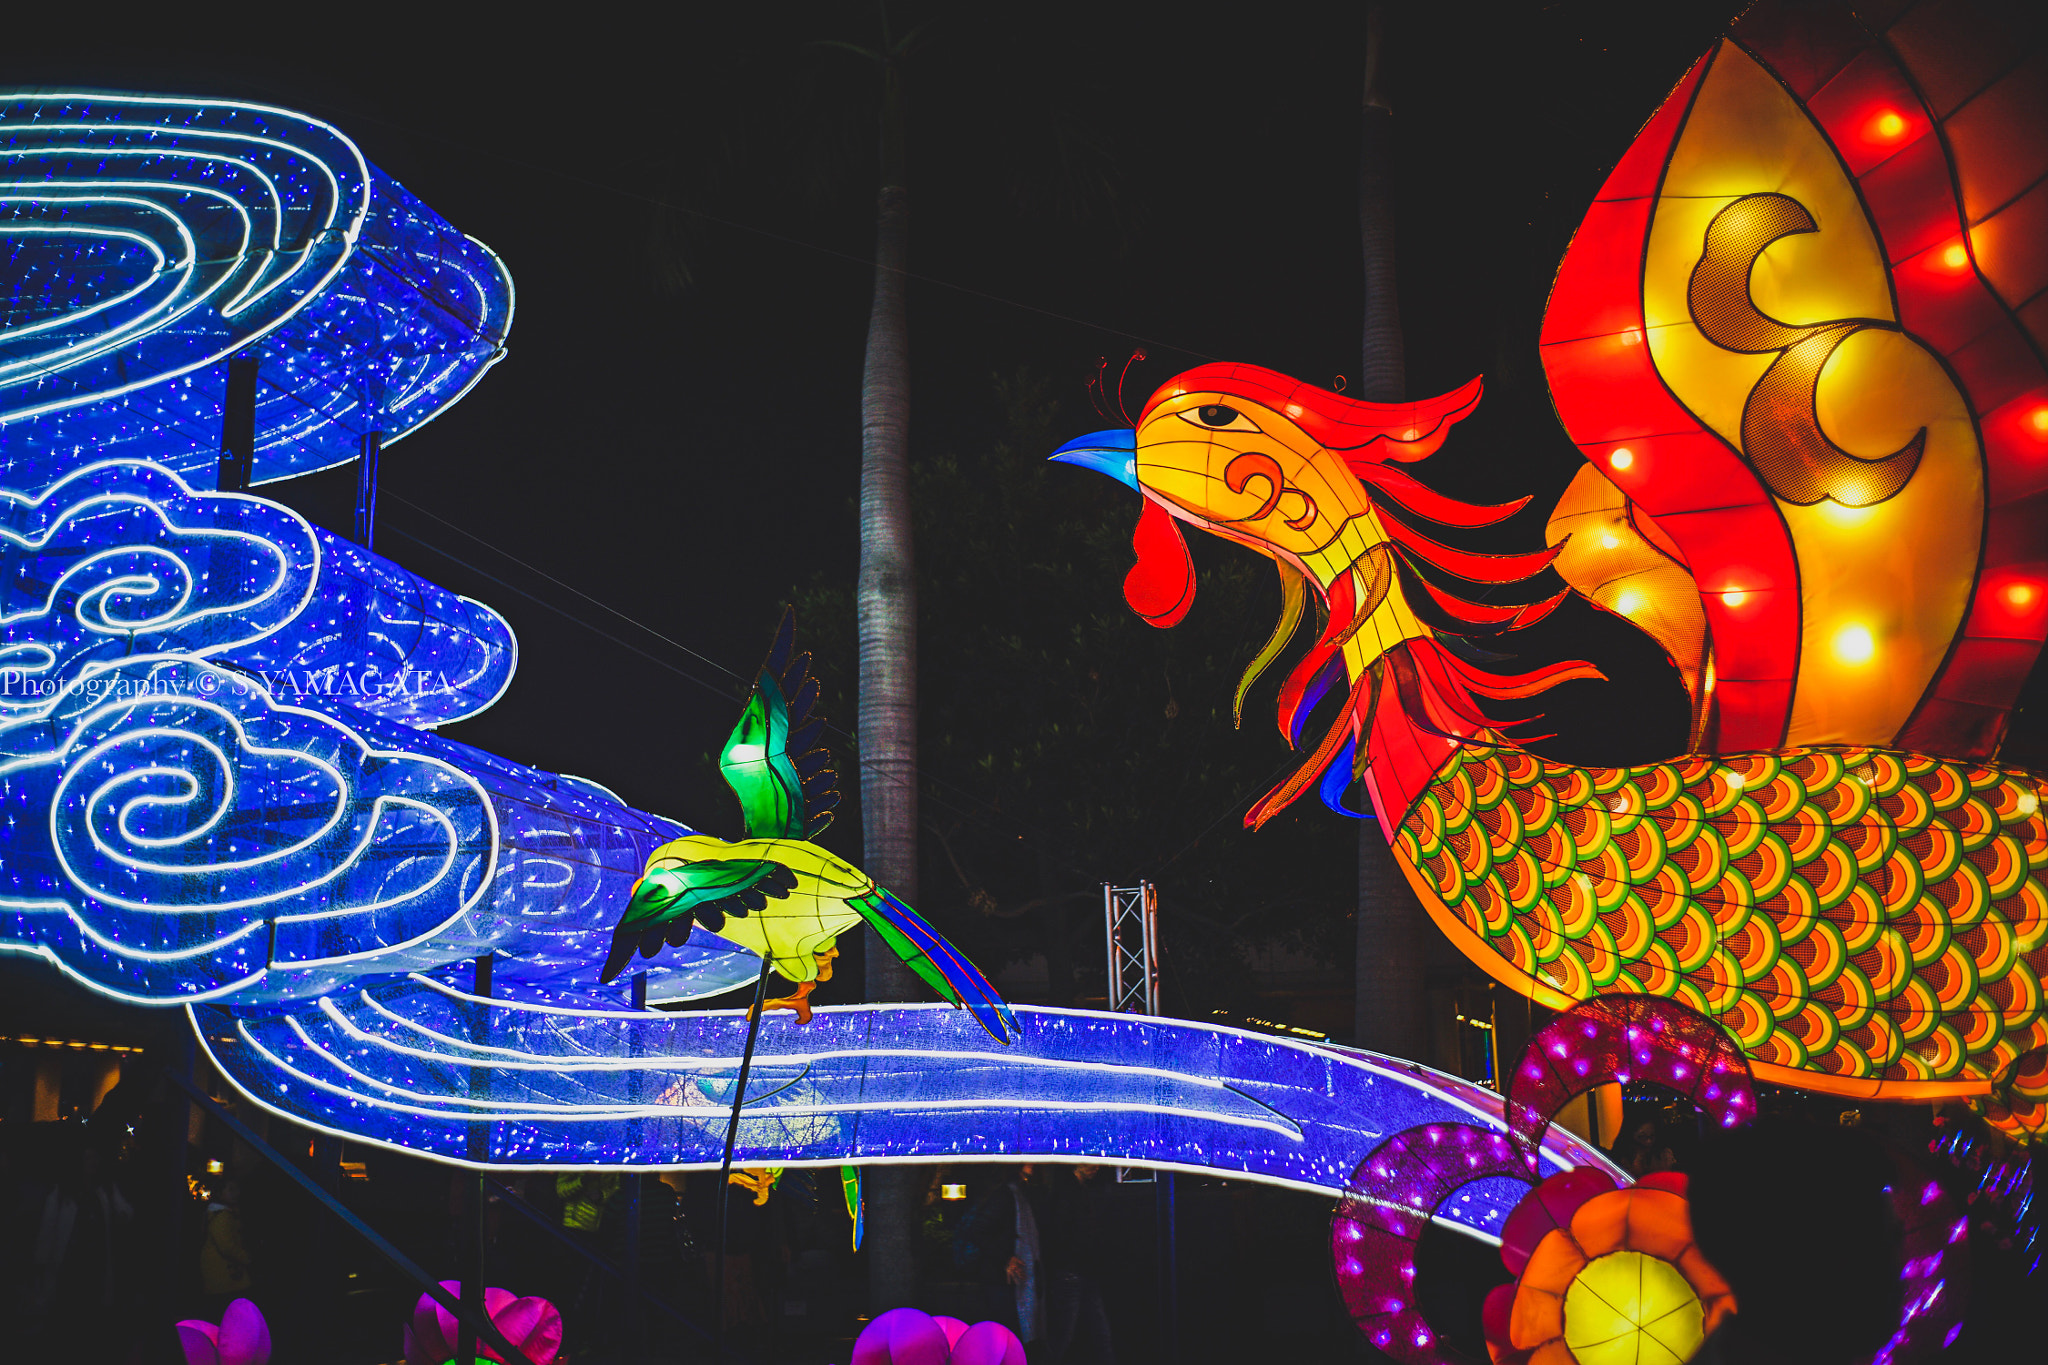 Sony a7 II sample photo. Chinese new year decoration photography